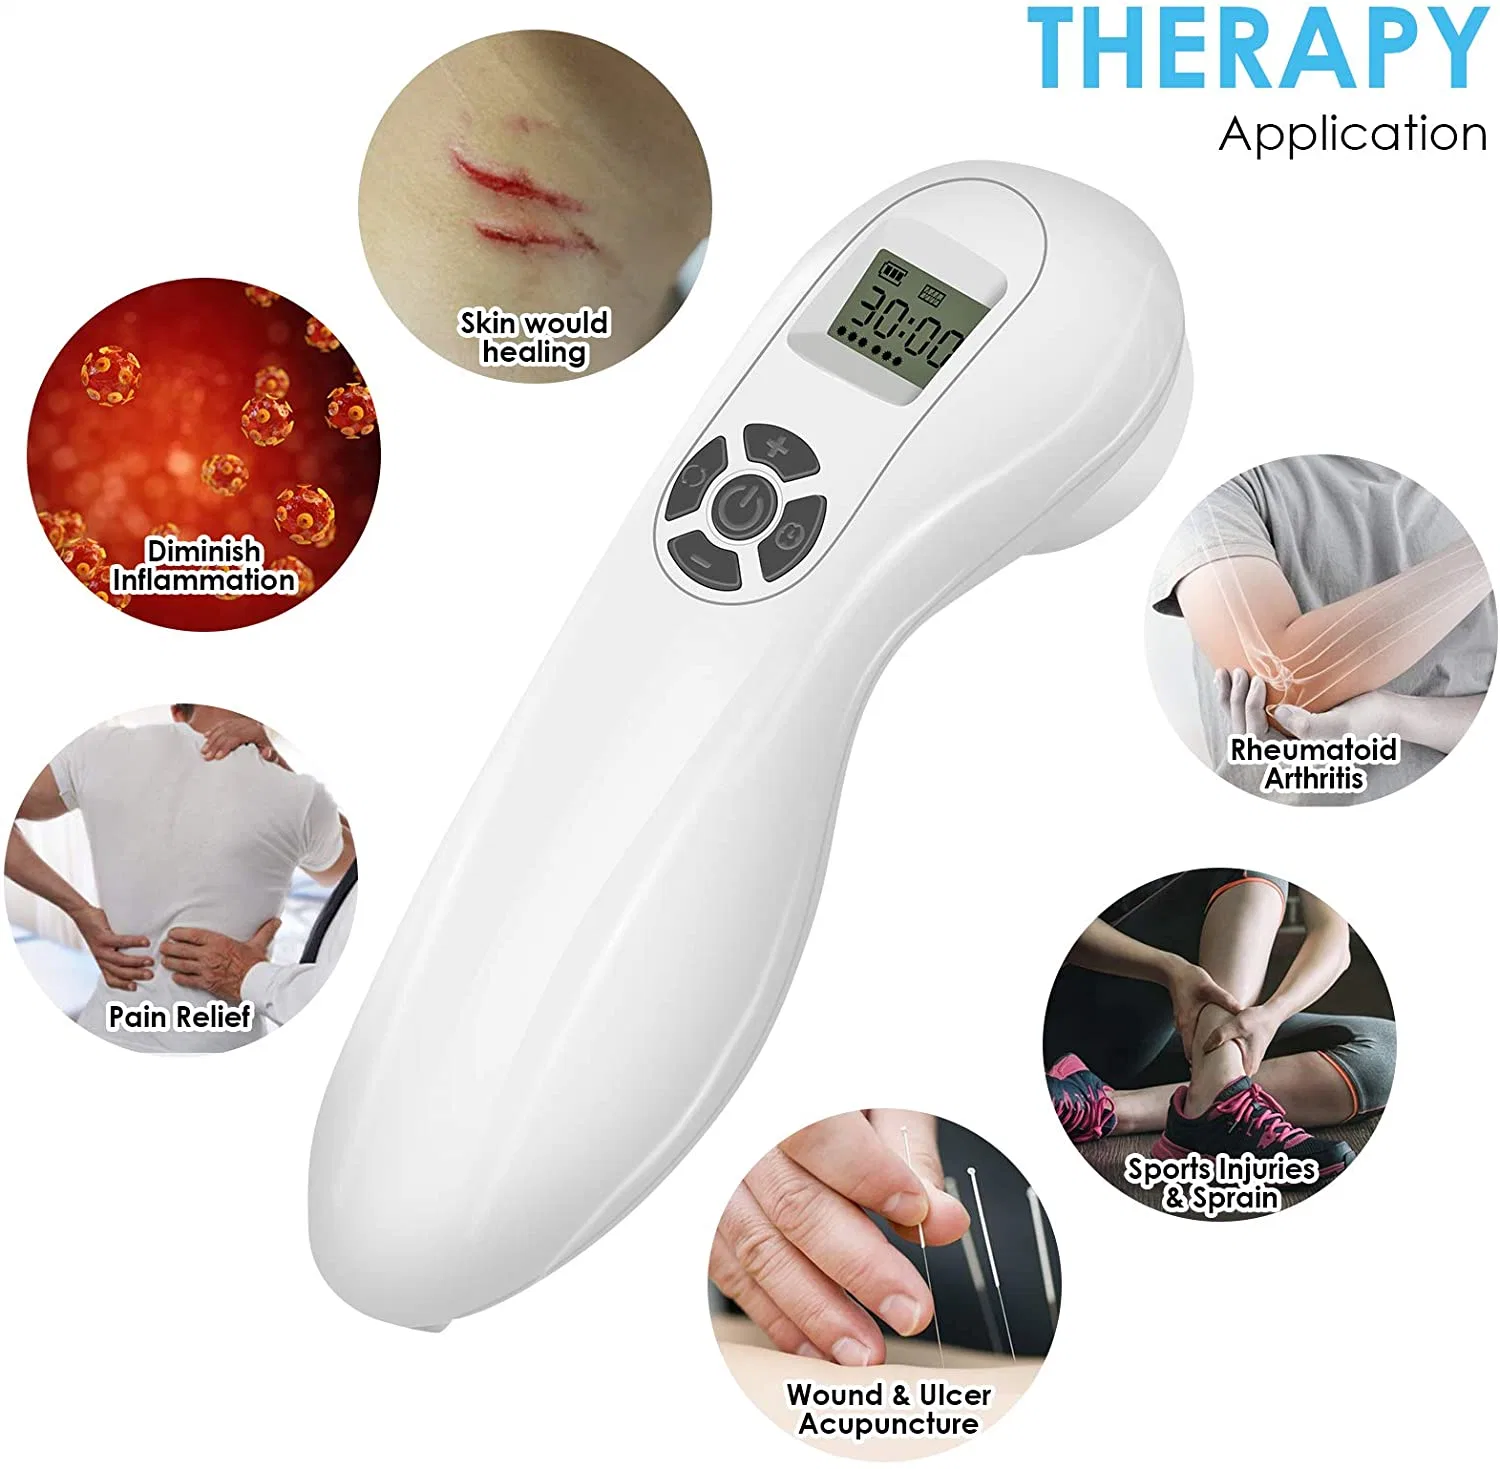 Physical Therapy Handheld Laser Device Equipment